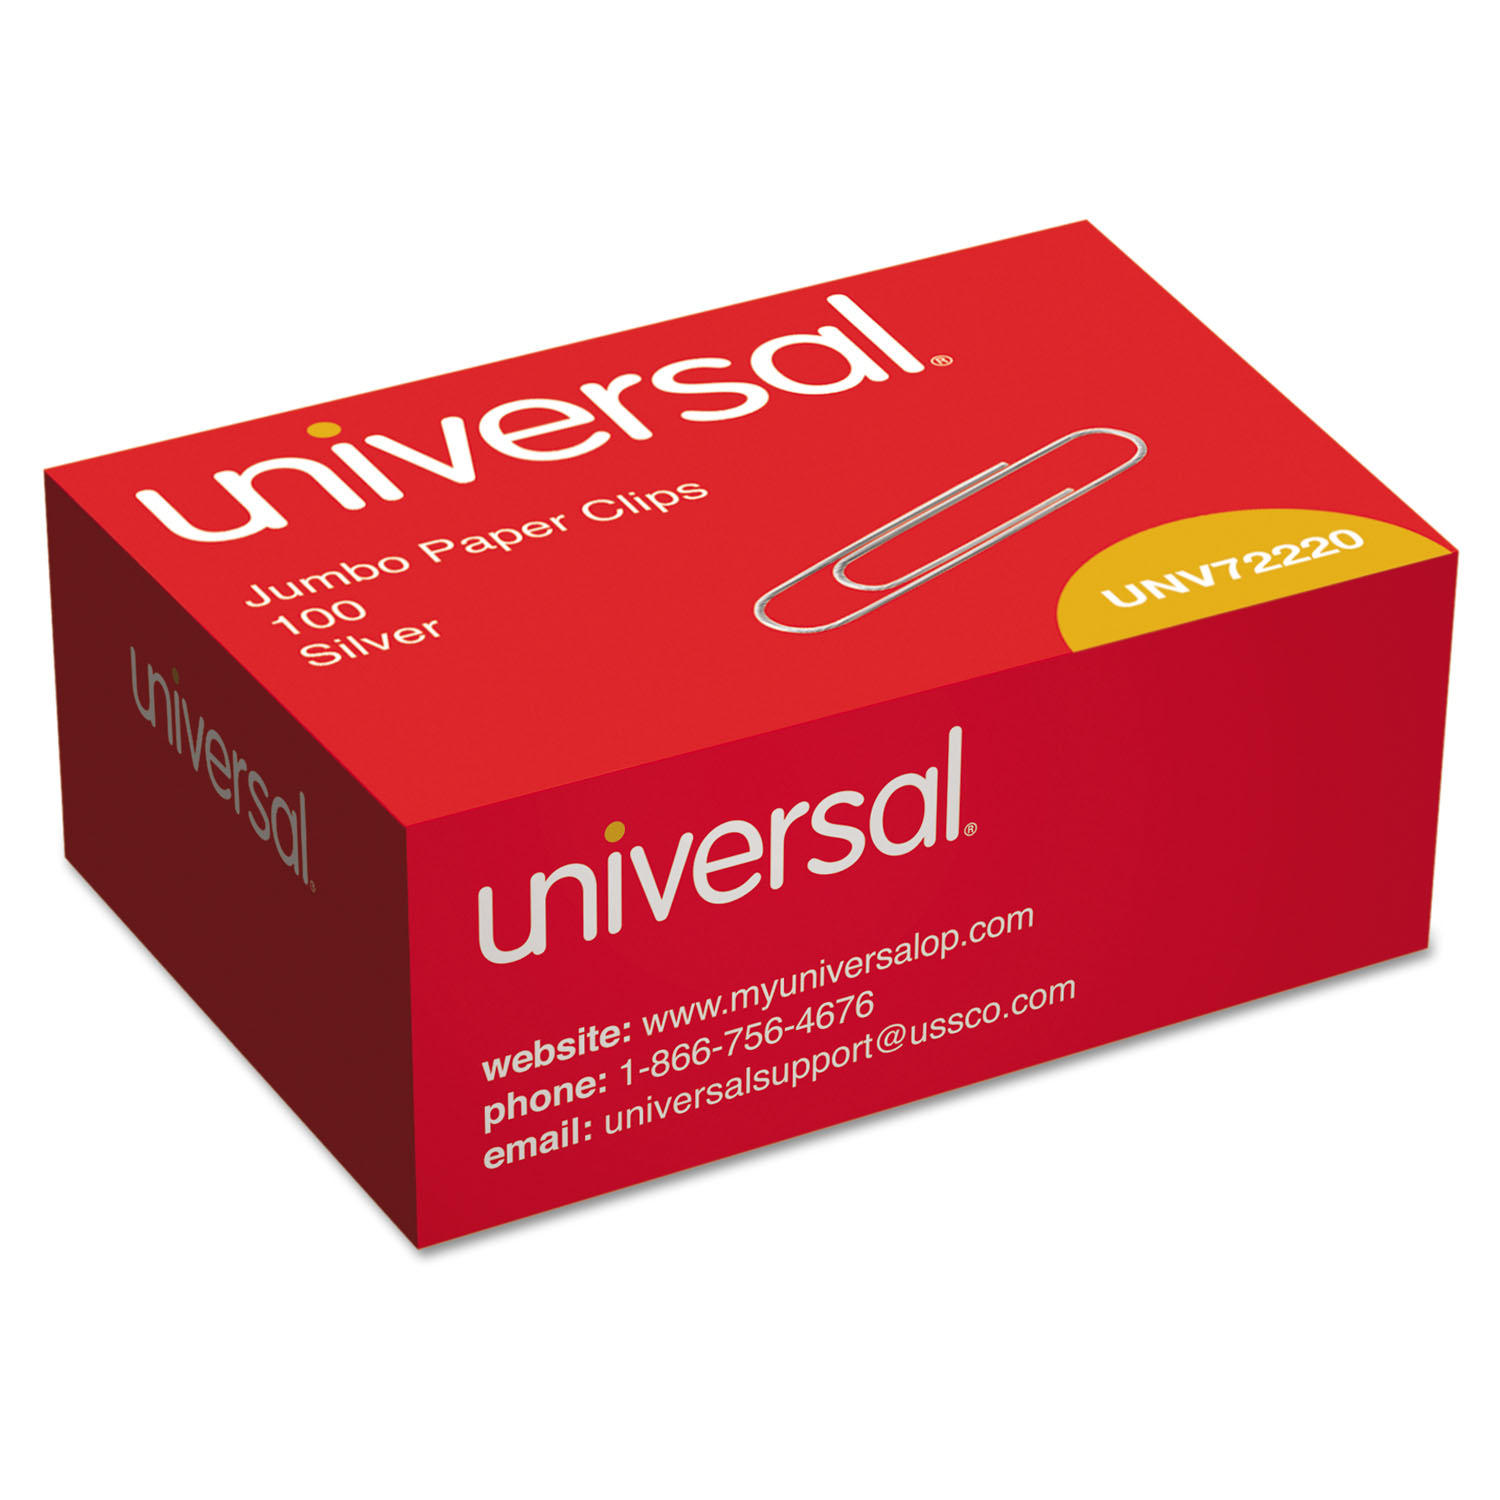 Universal® Smooth Paper Clips, Jumbo, Silver, 100/Box, 10 Boxes/Pack